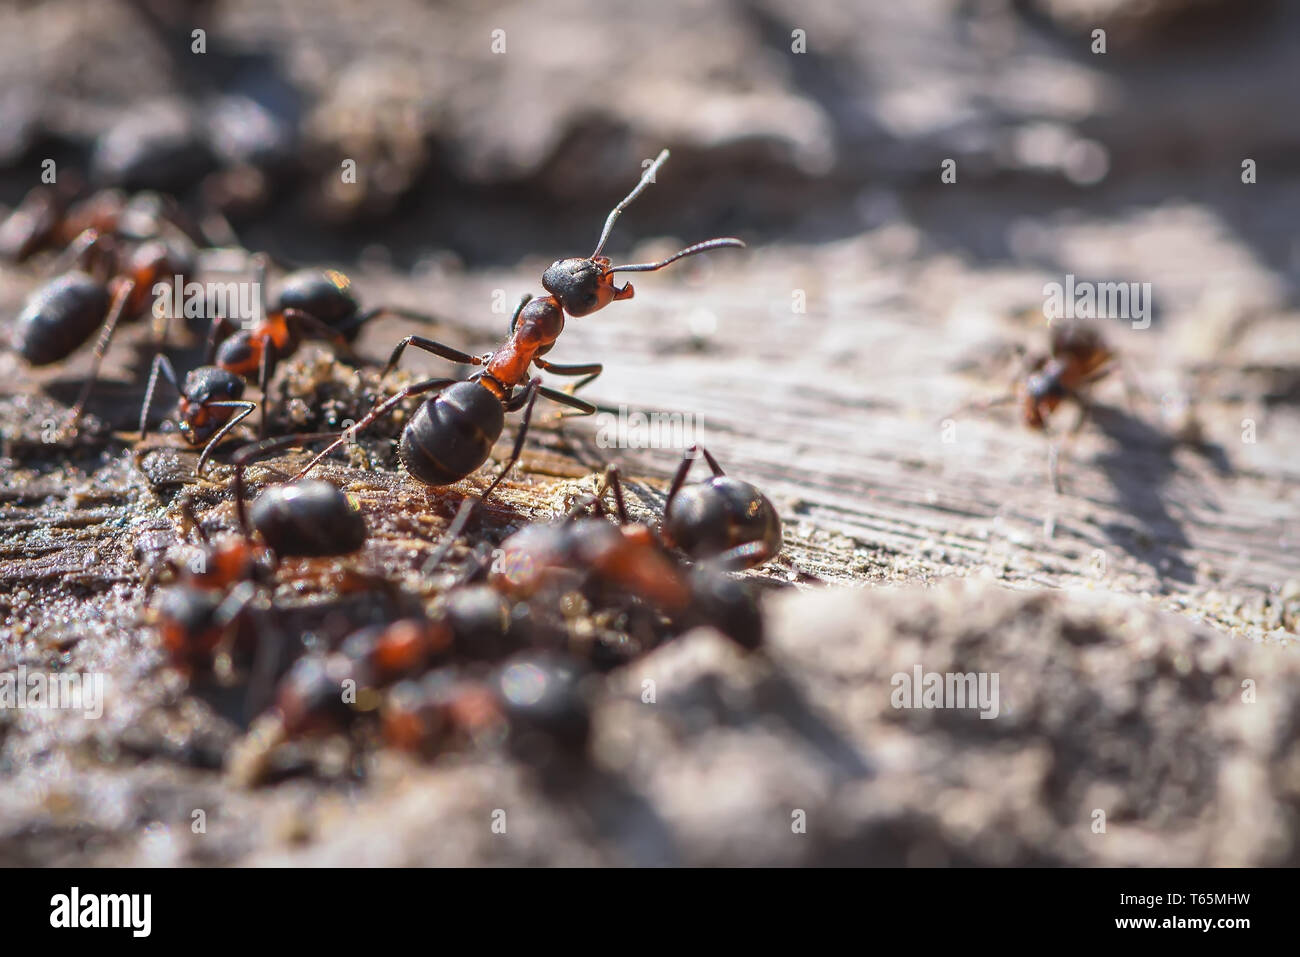 Red ant close up on sand and tree root Stock Photo